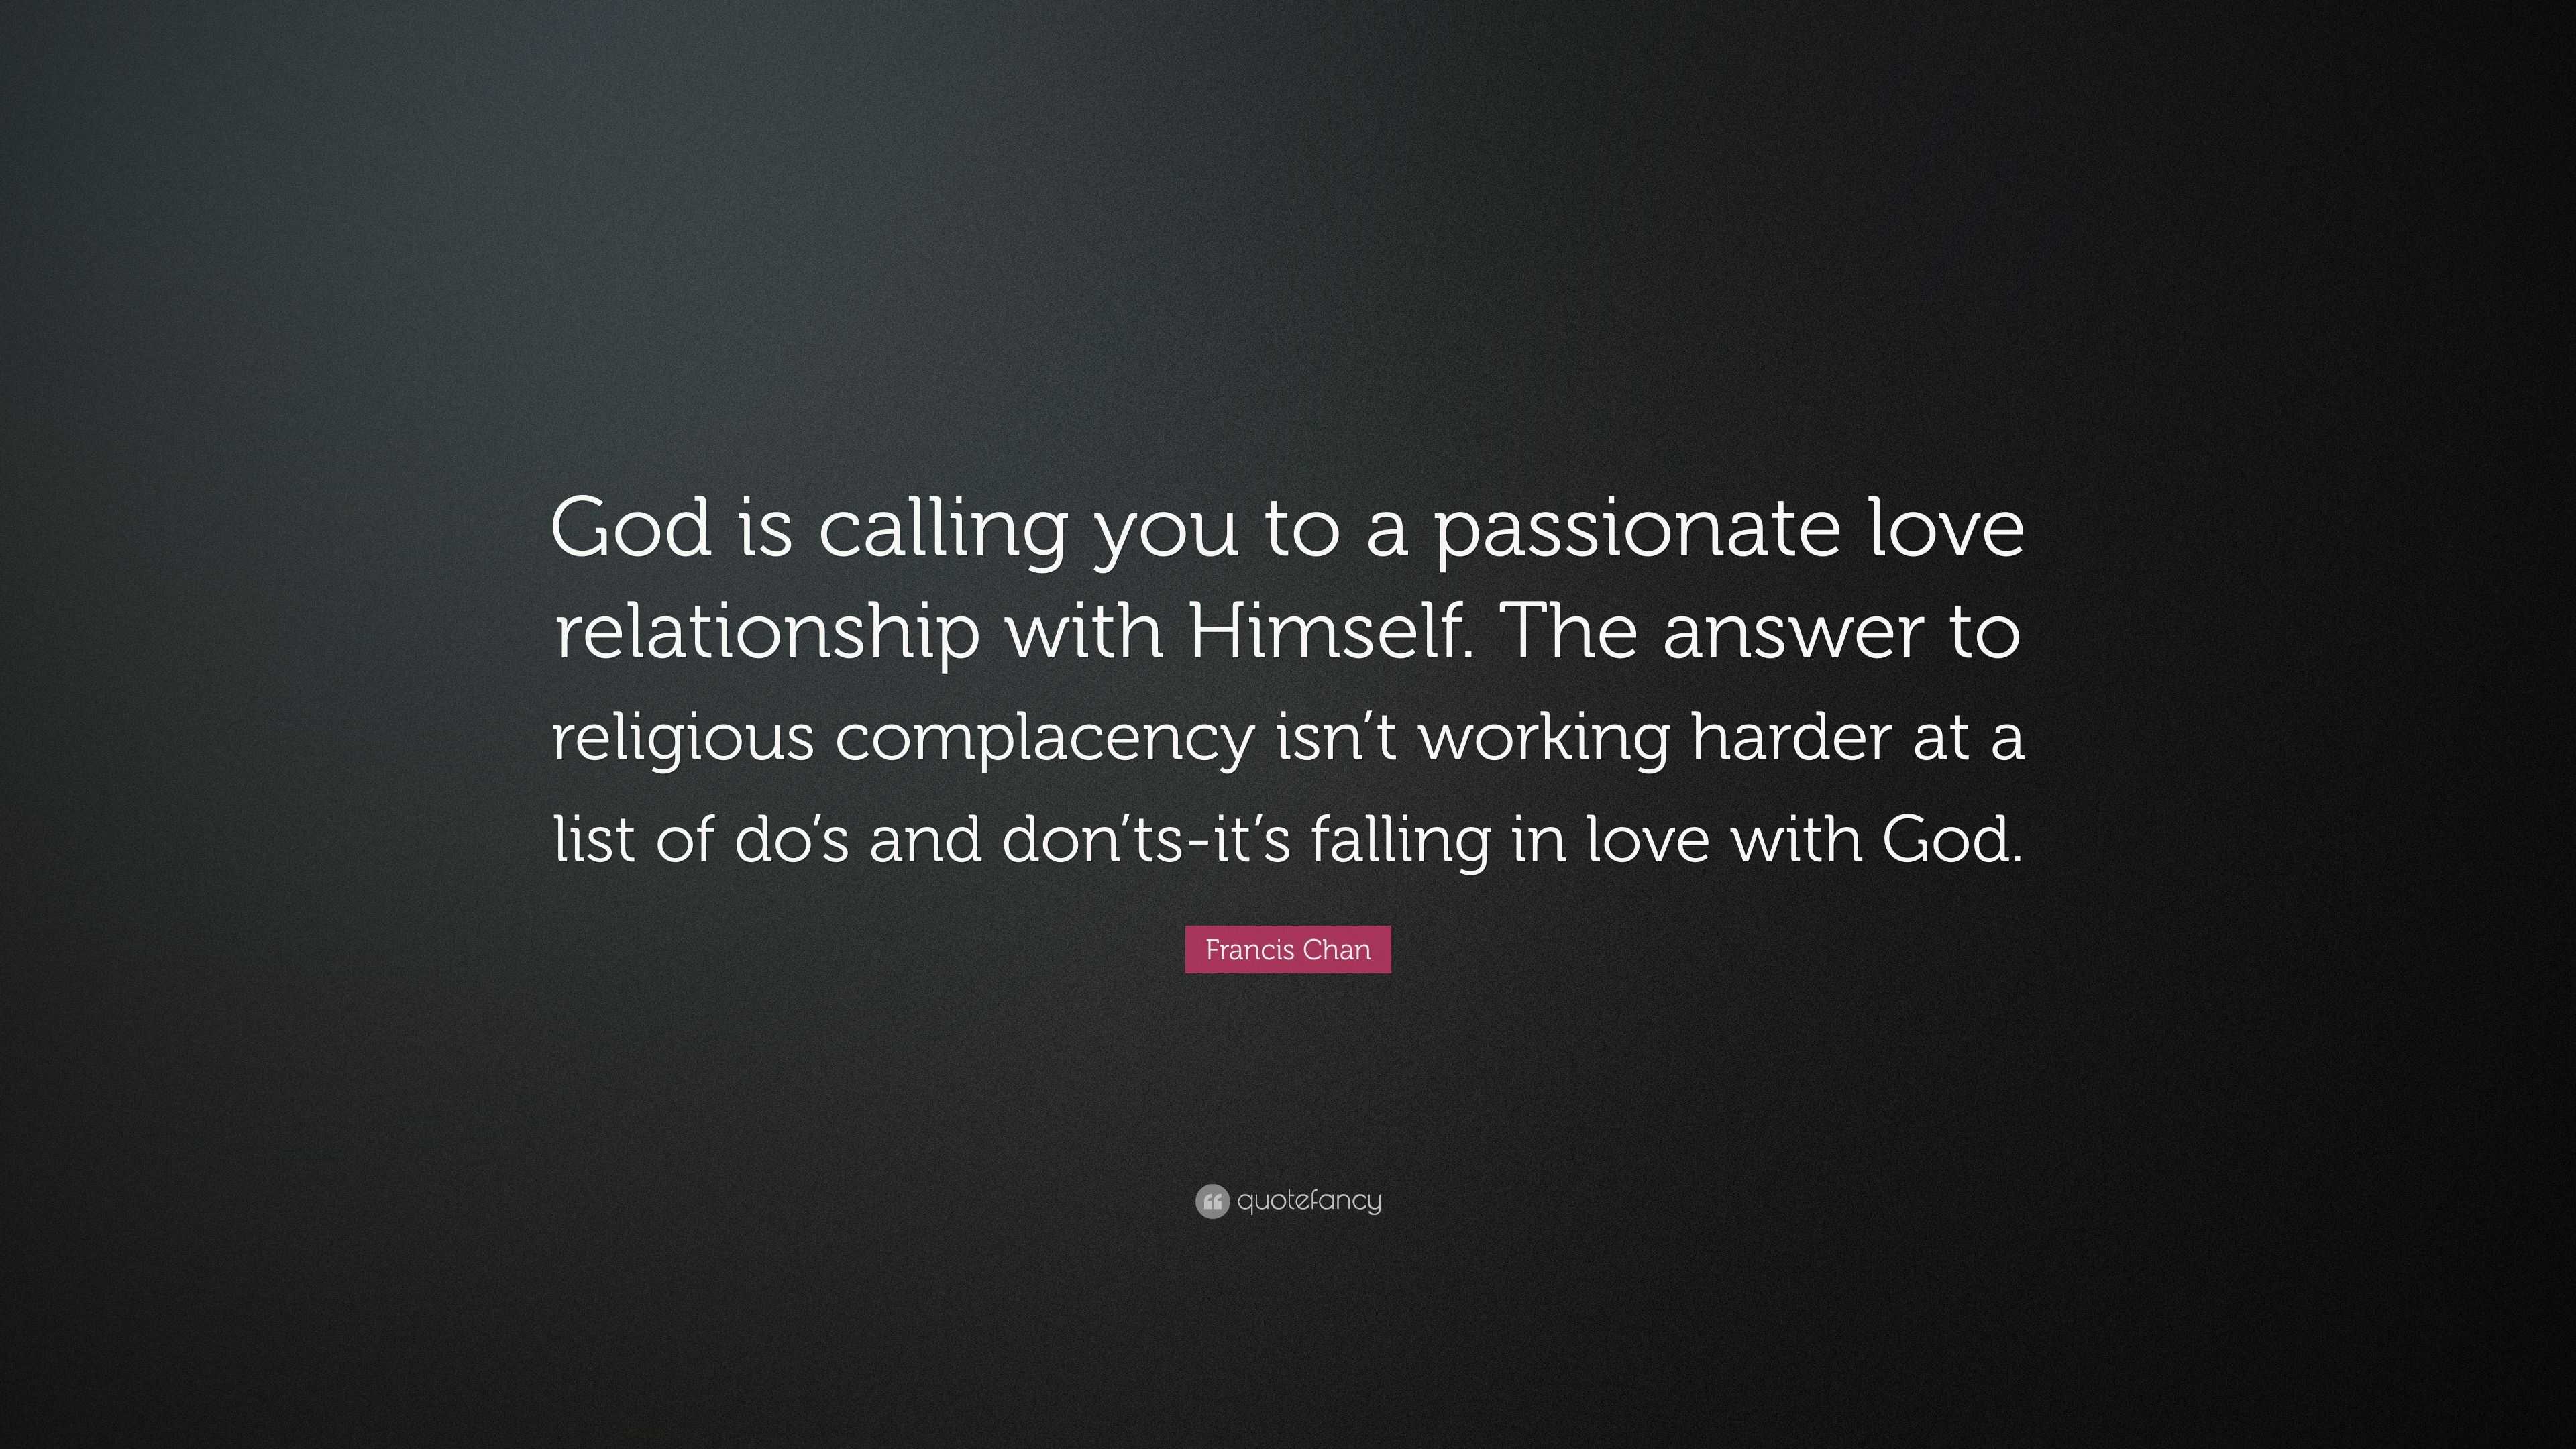 Francis Chan Quote Ising You To A P Ionate Love Relationship With Himself